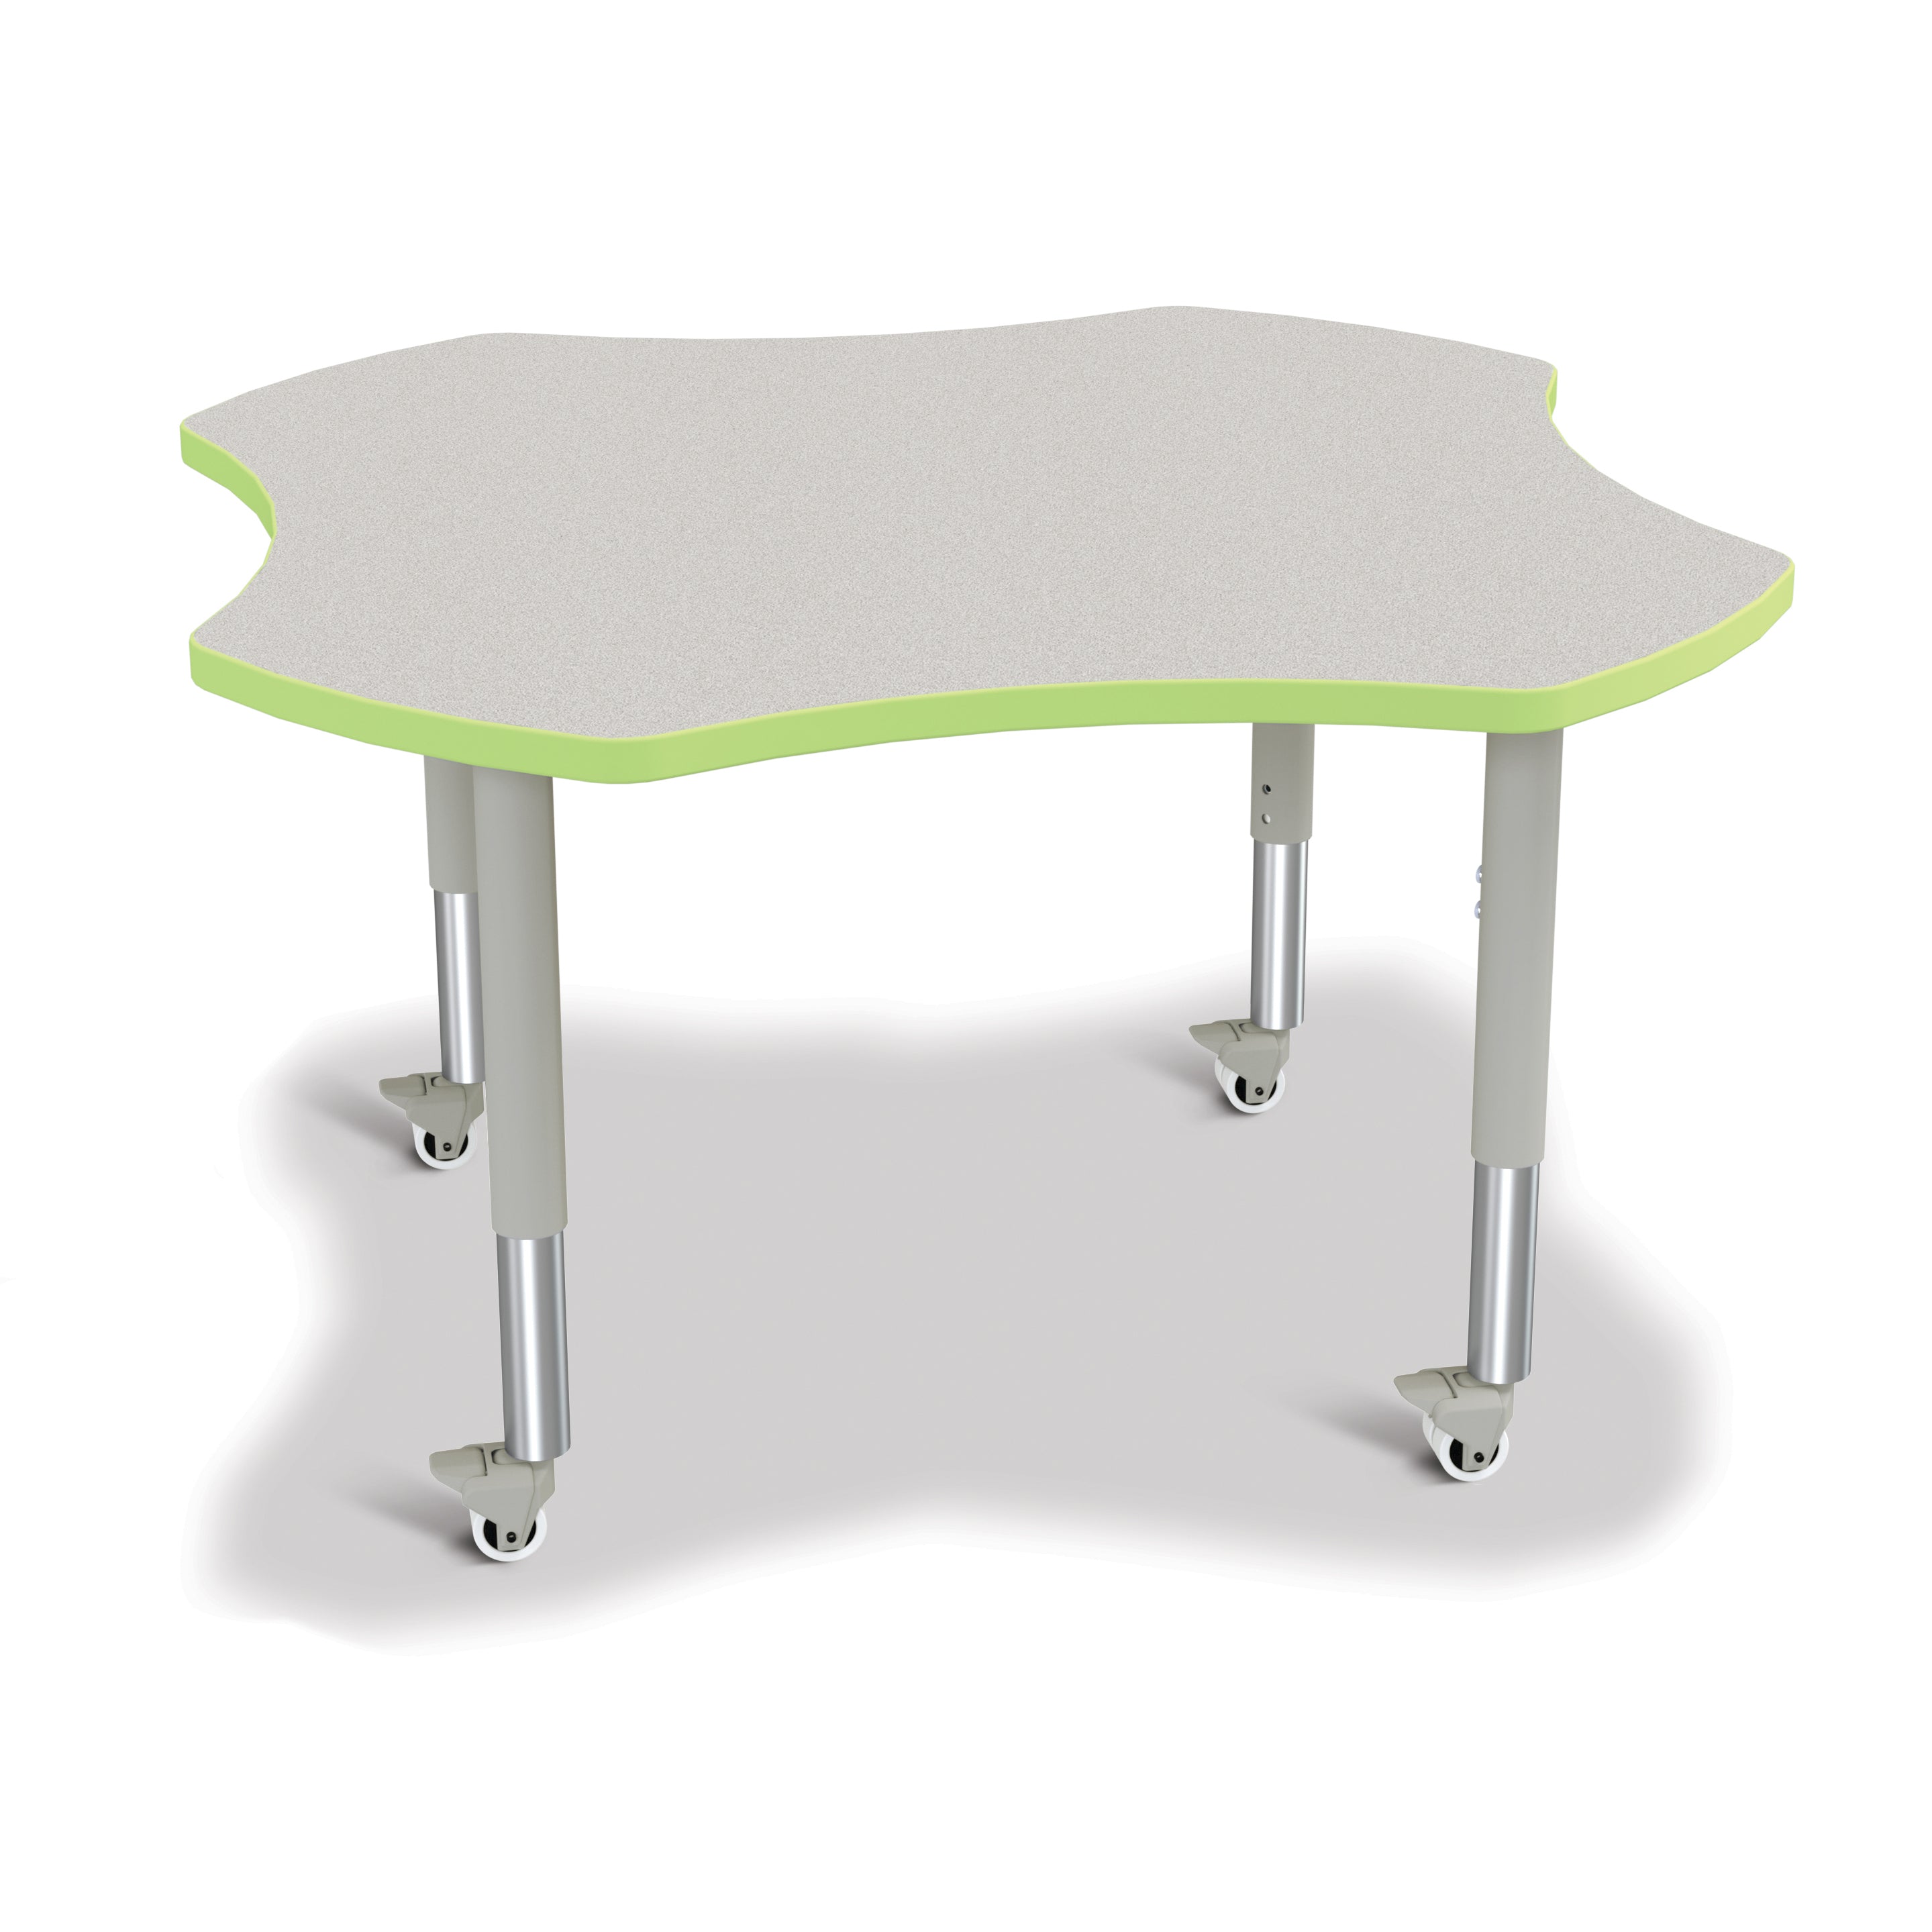 6453JCM130, Berries Four Leaf Activity Table, Mobile - Freckled Gray/Key Lime/Gray